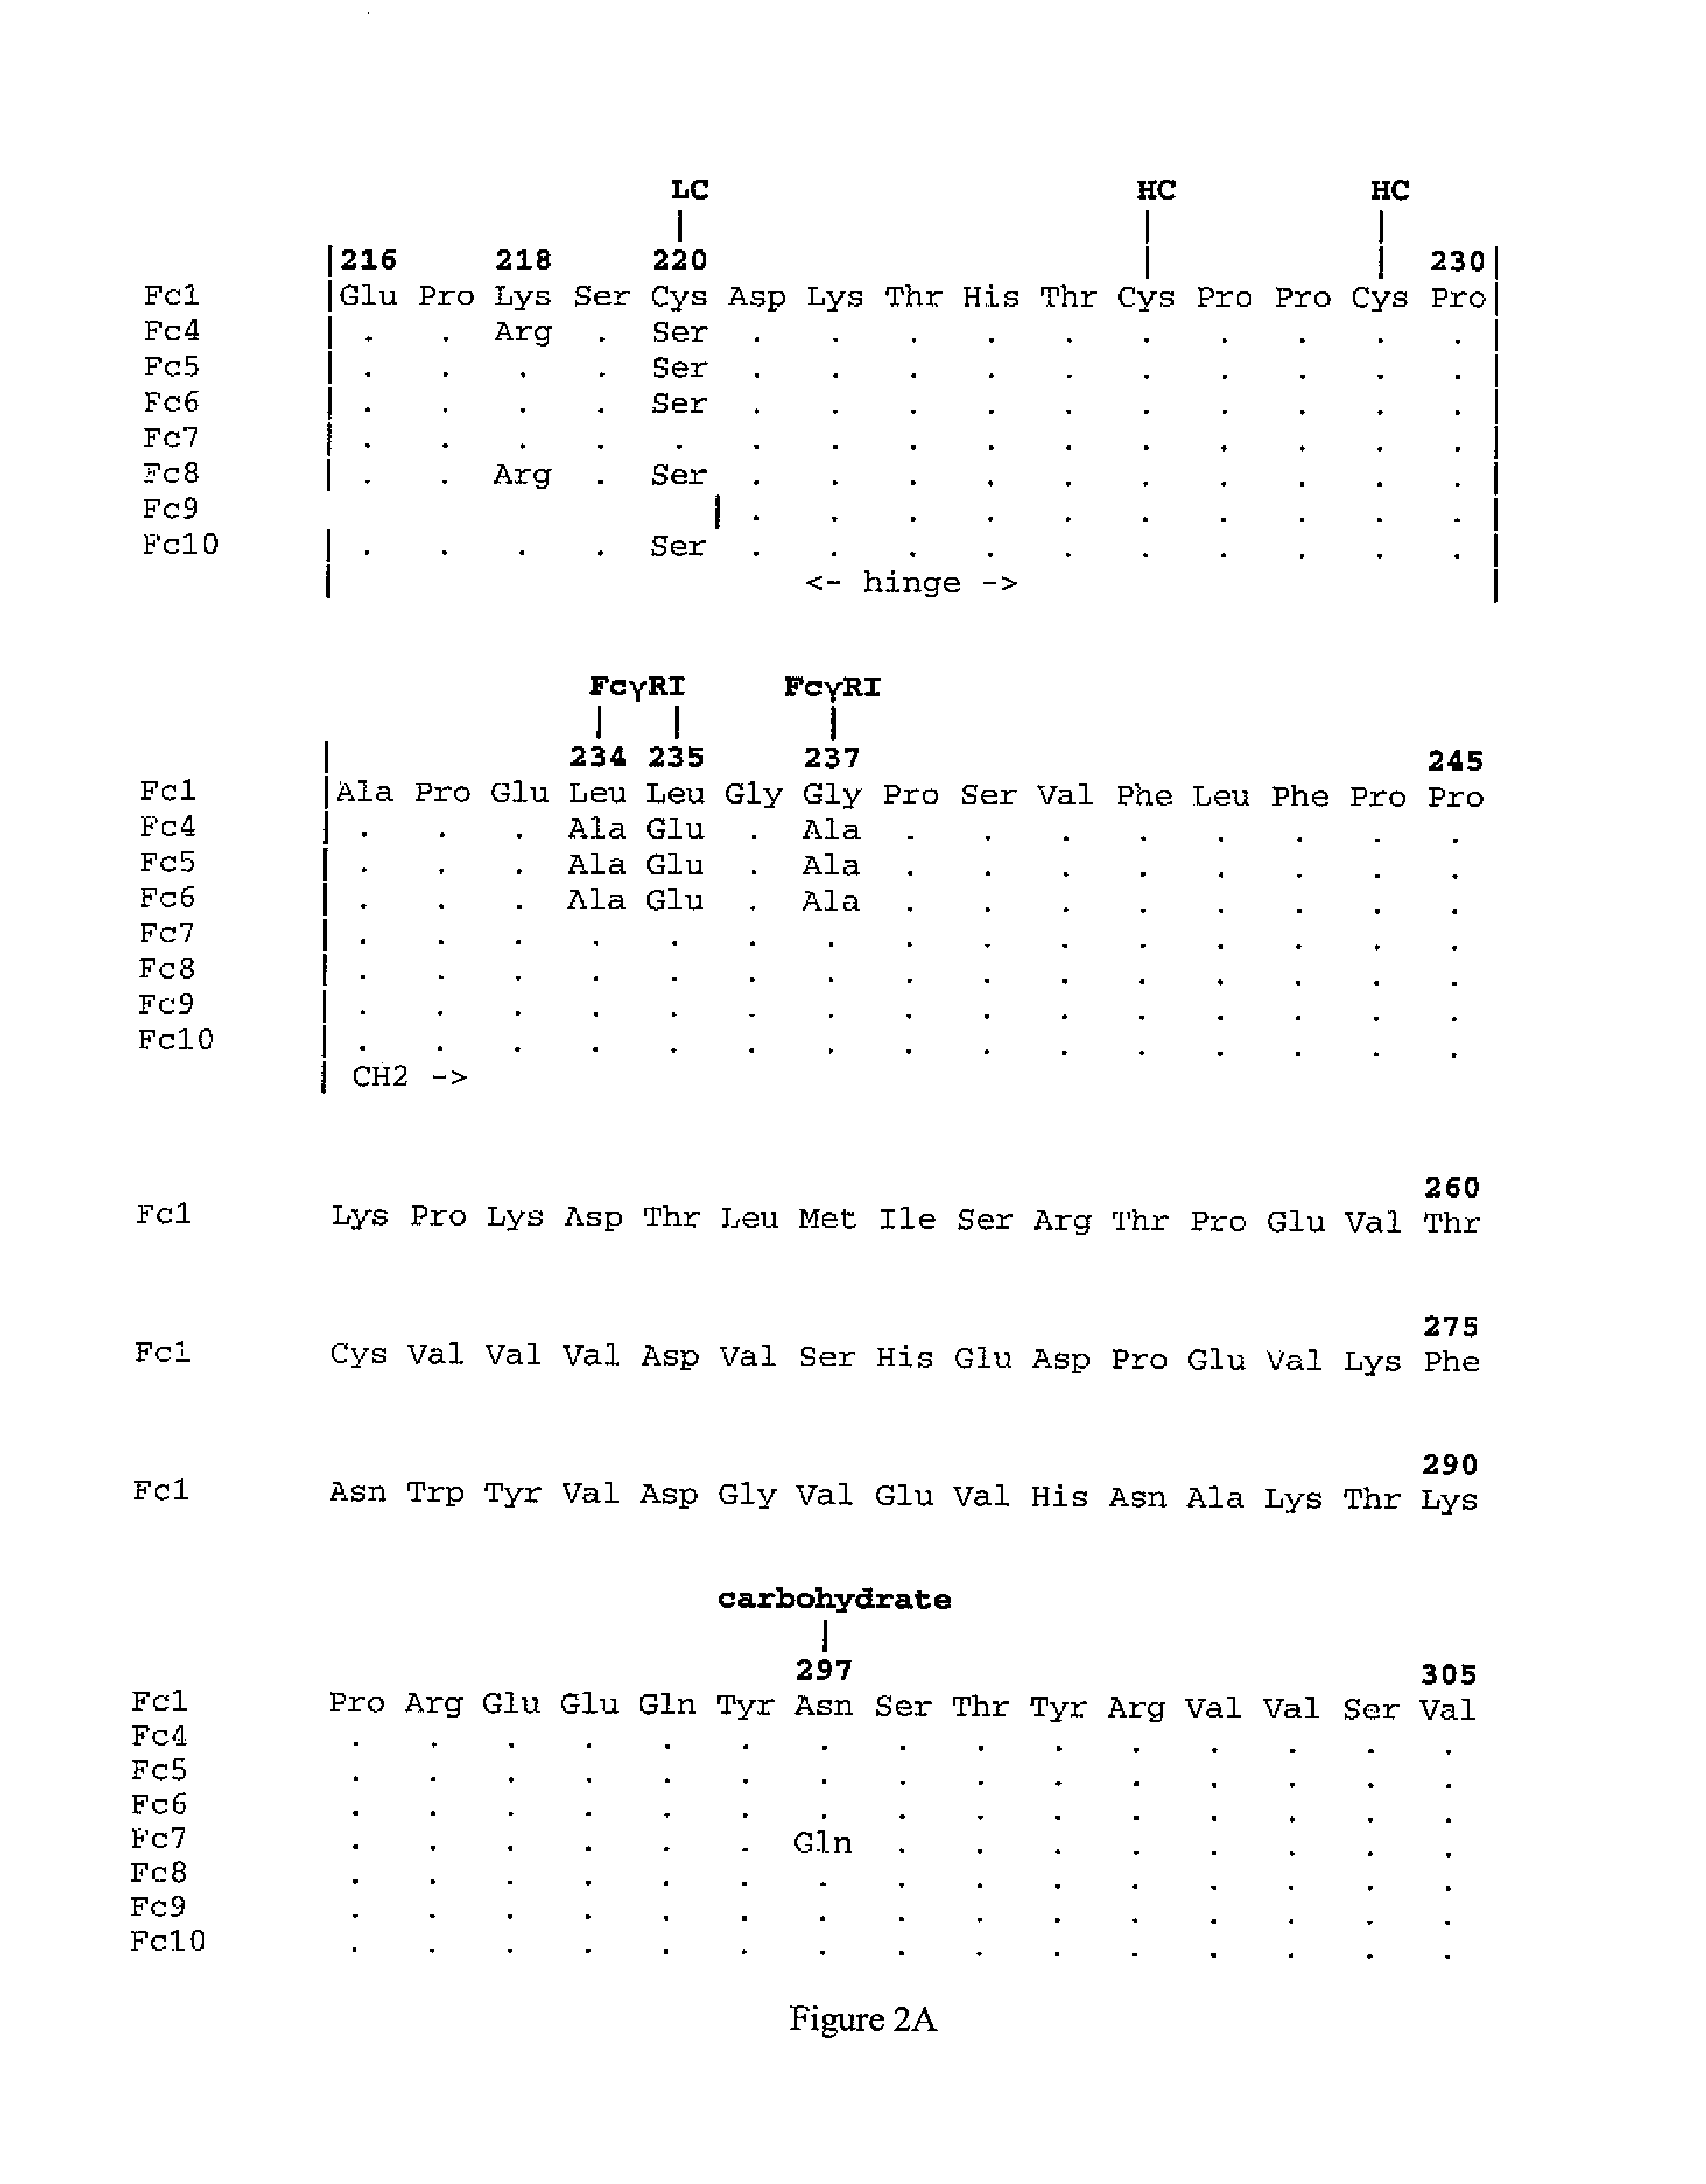 Single chain fc, methods of making and methods of treatment